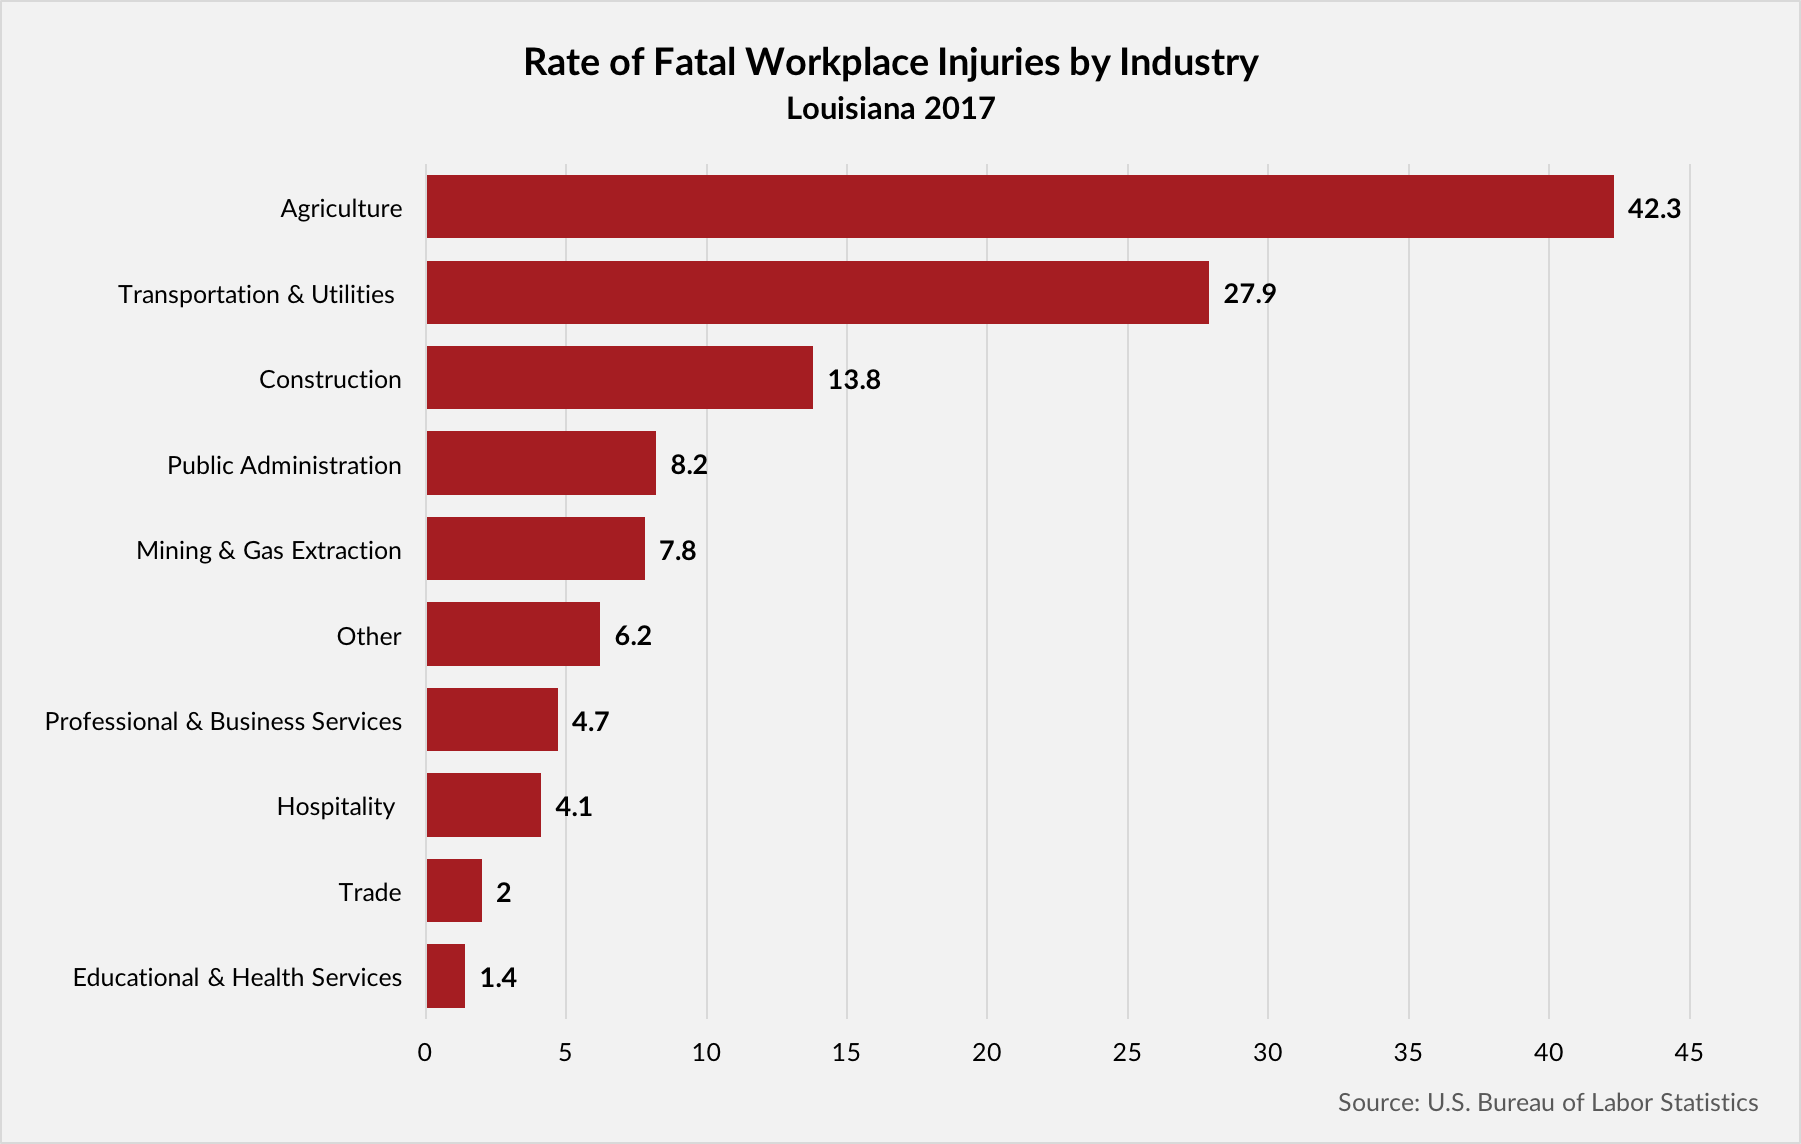 Rate of fatal workplace injuries by industry